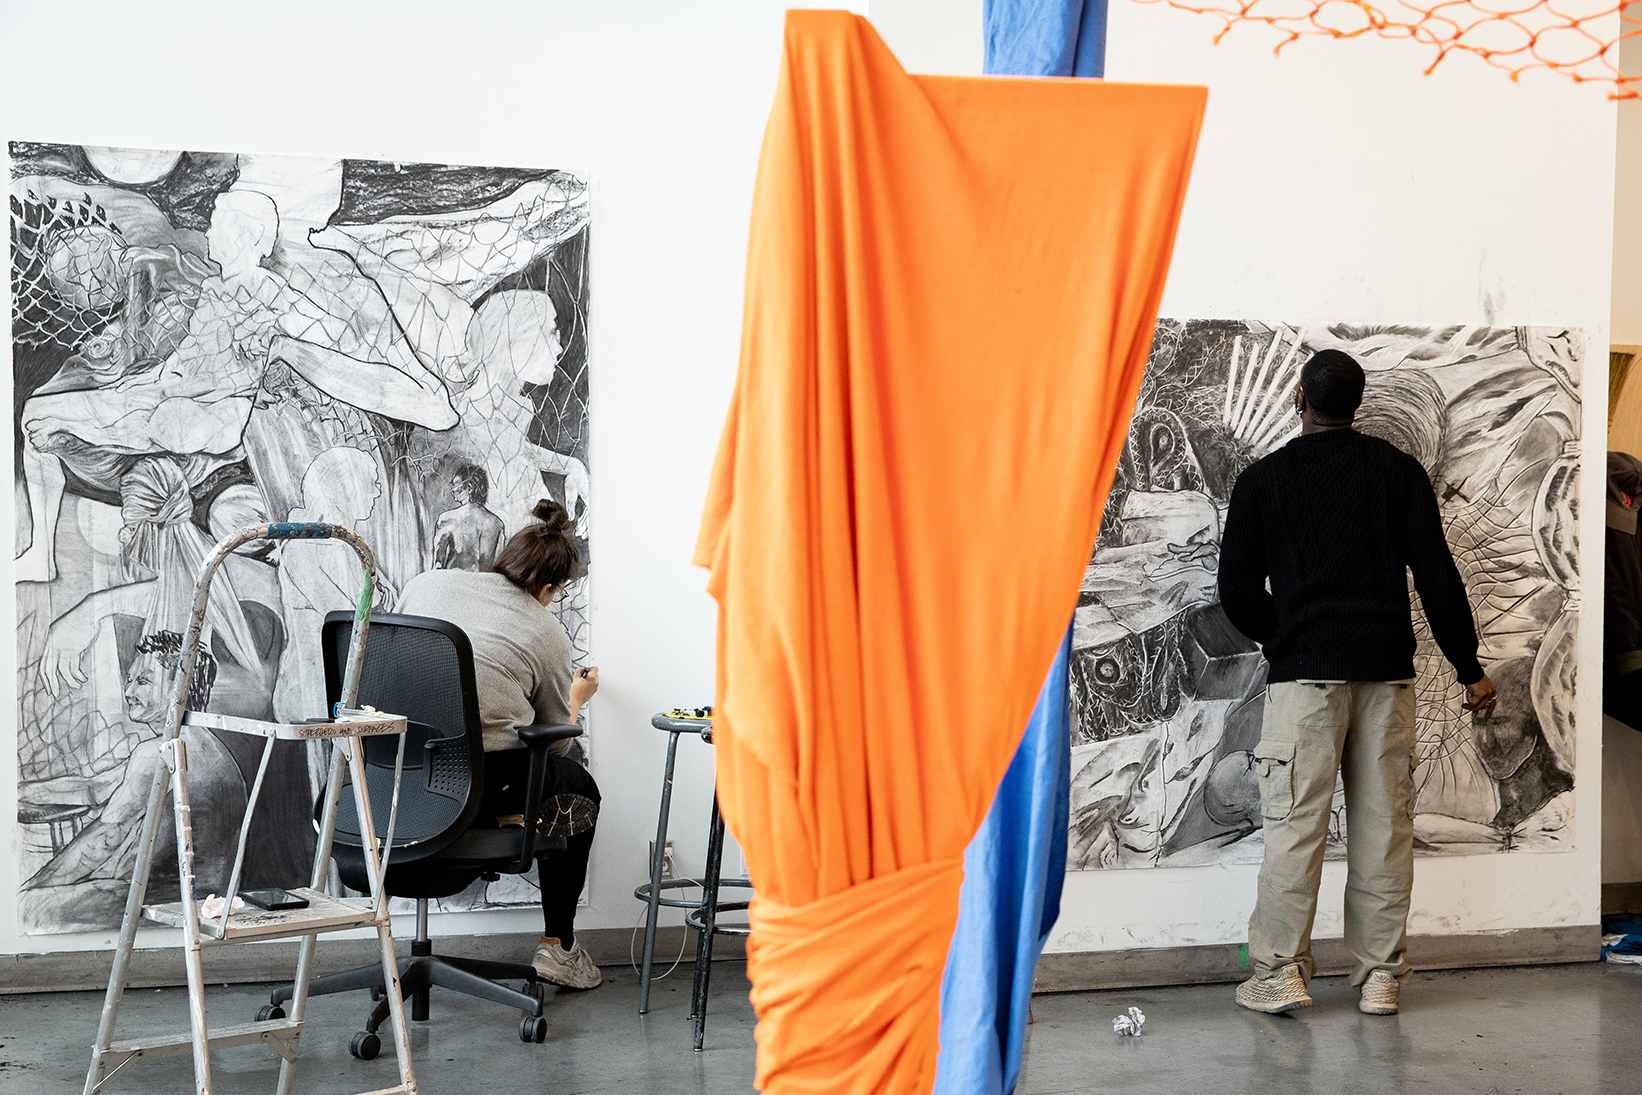 Two people, divided by an orange textile in the foreground, work side-by-side in a studio on large-scale drawings.